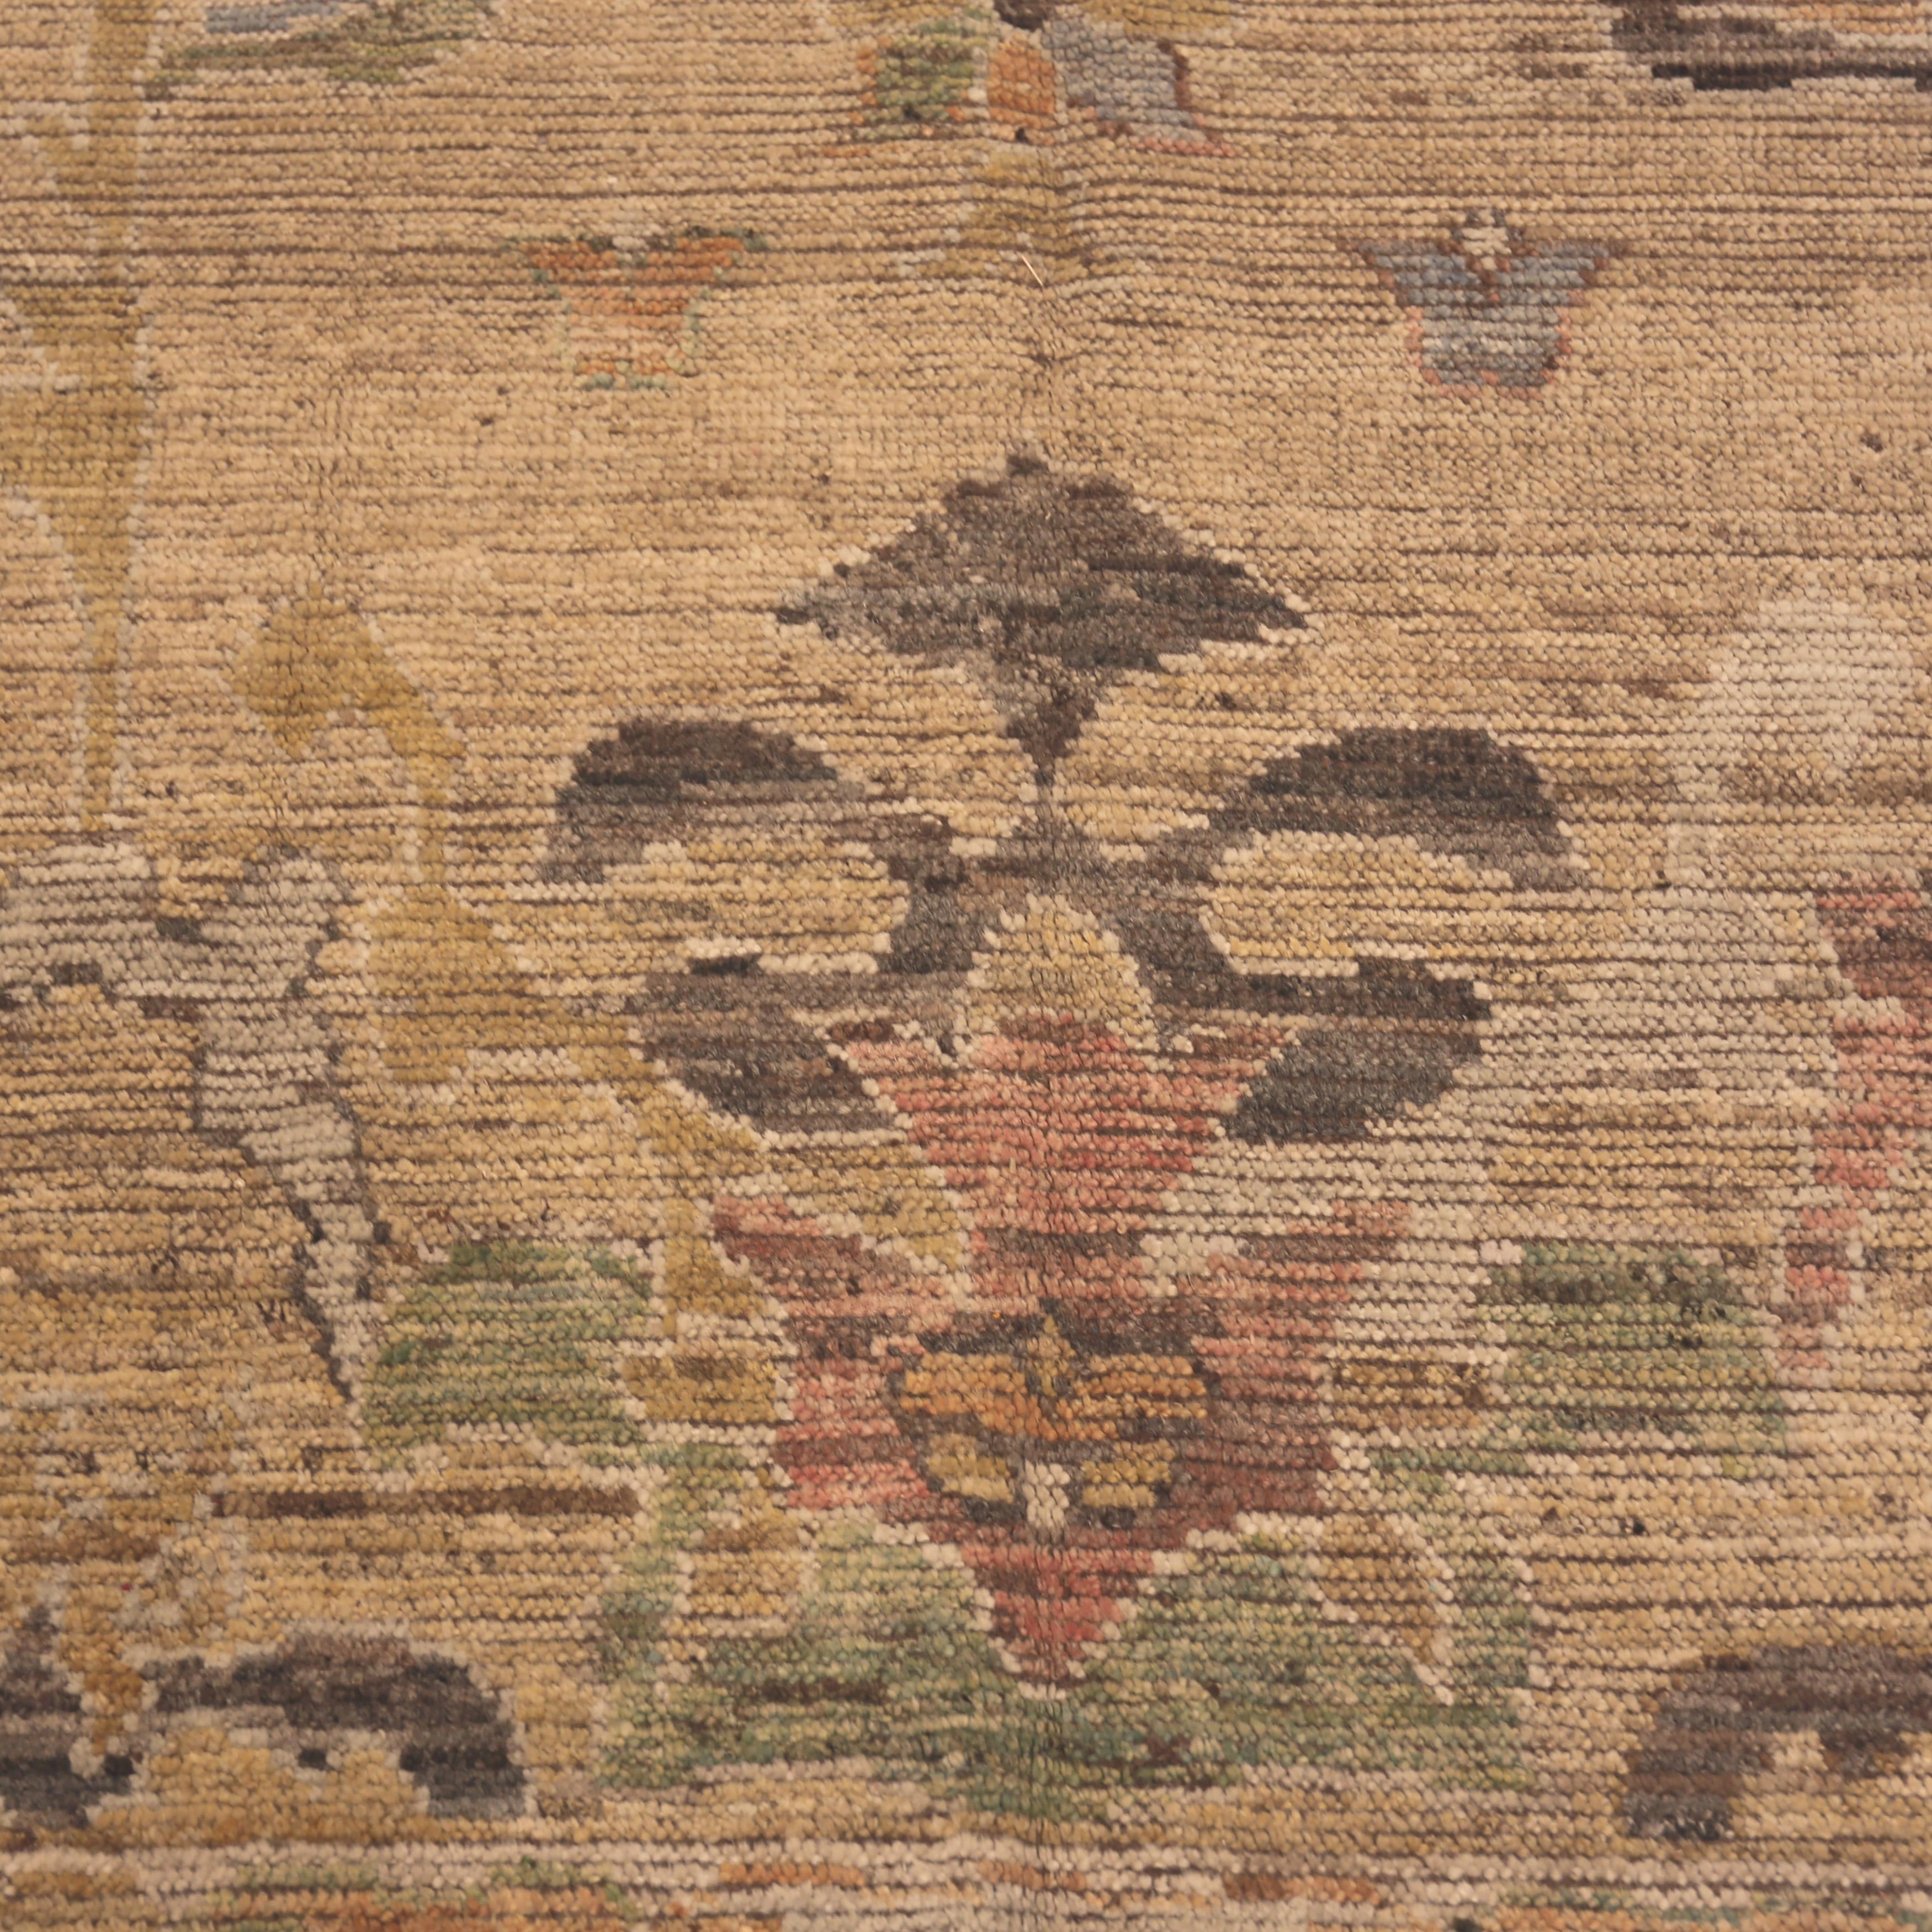 Masterful craftsmanship and strong antique quality make this Zameen Mid Century Modern Rug 8'4